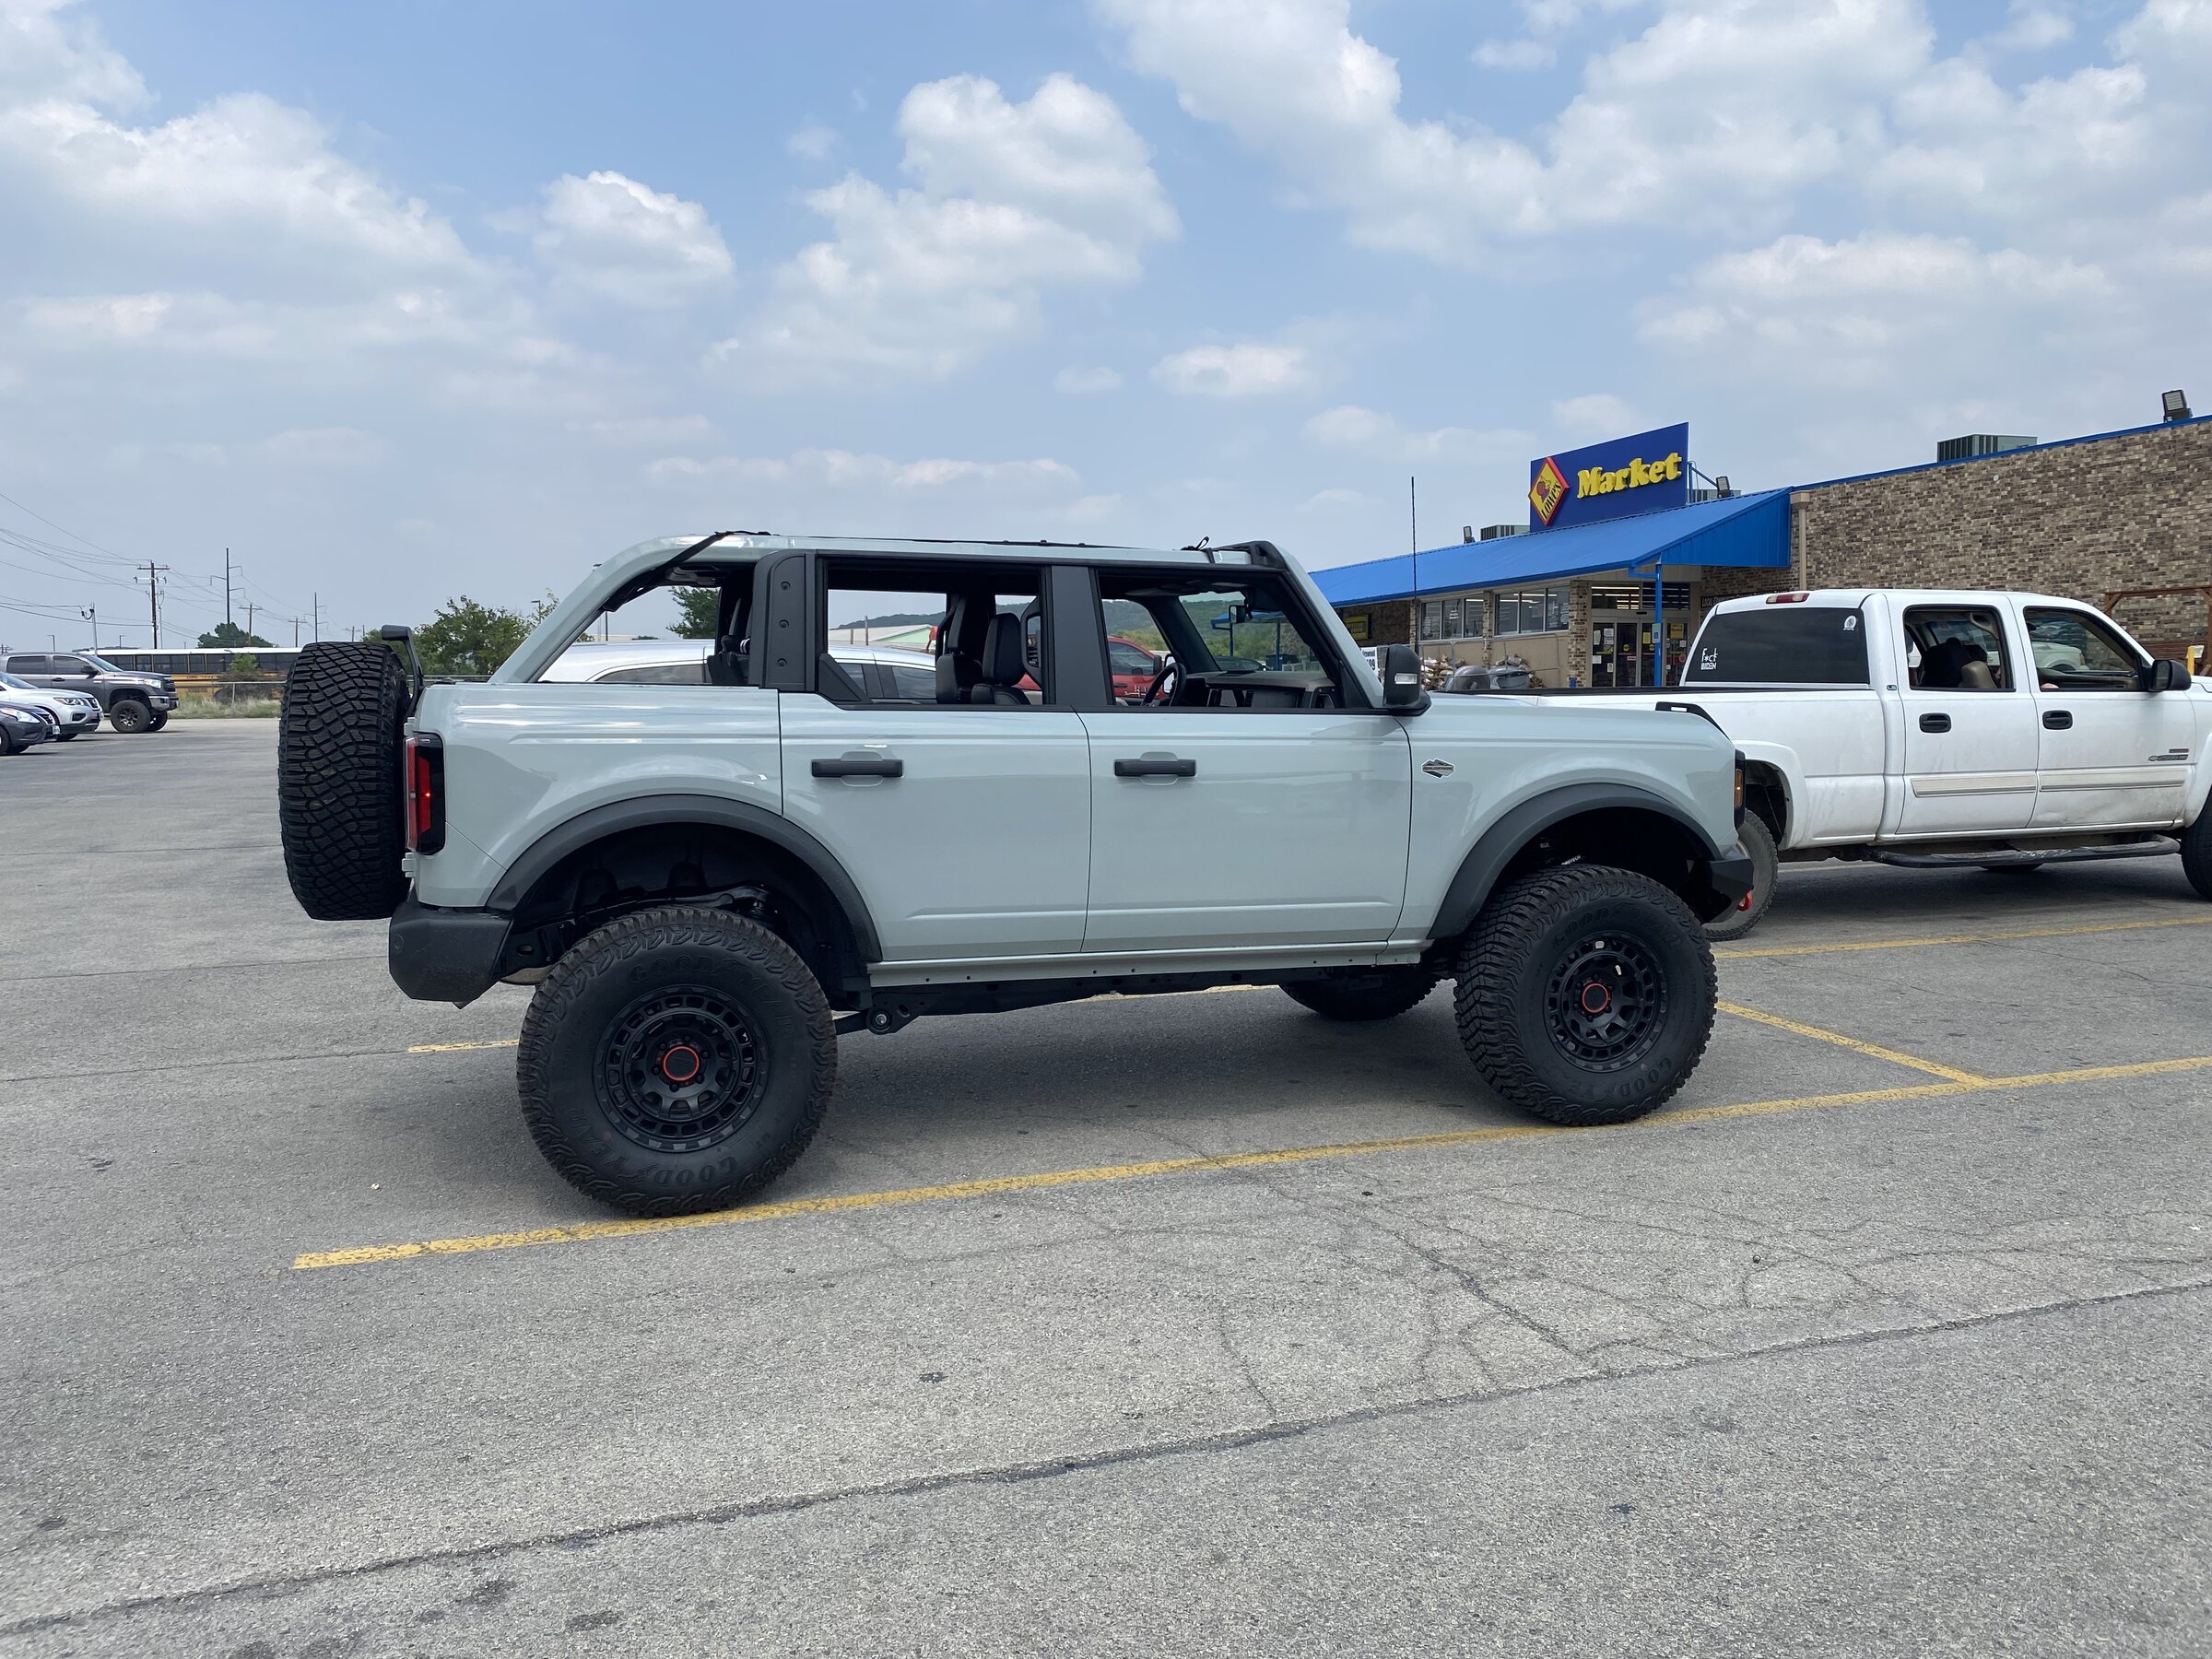 Ford Bronco Getting groceries and getting dirty!! 3” Zone lift, 17" Black Rhinos 48A400C8-C42E-46CC-86DE-88A067062345